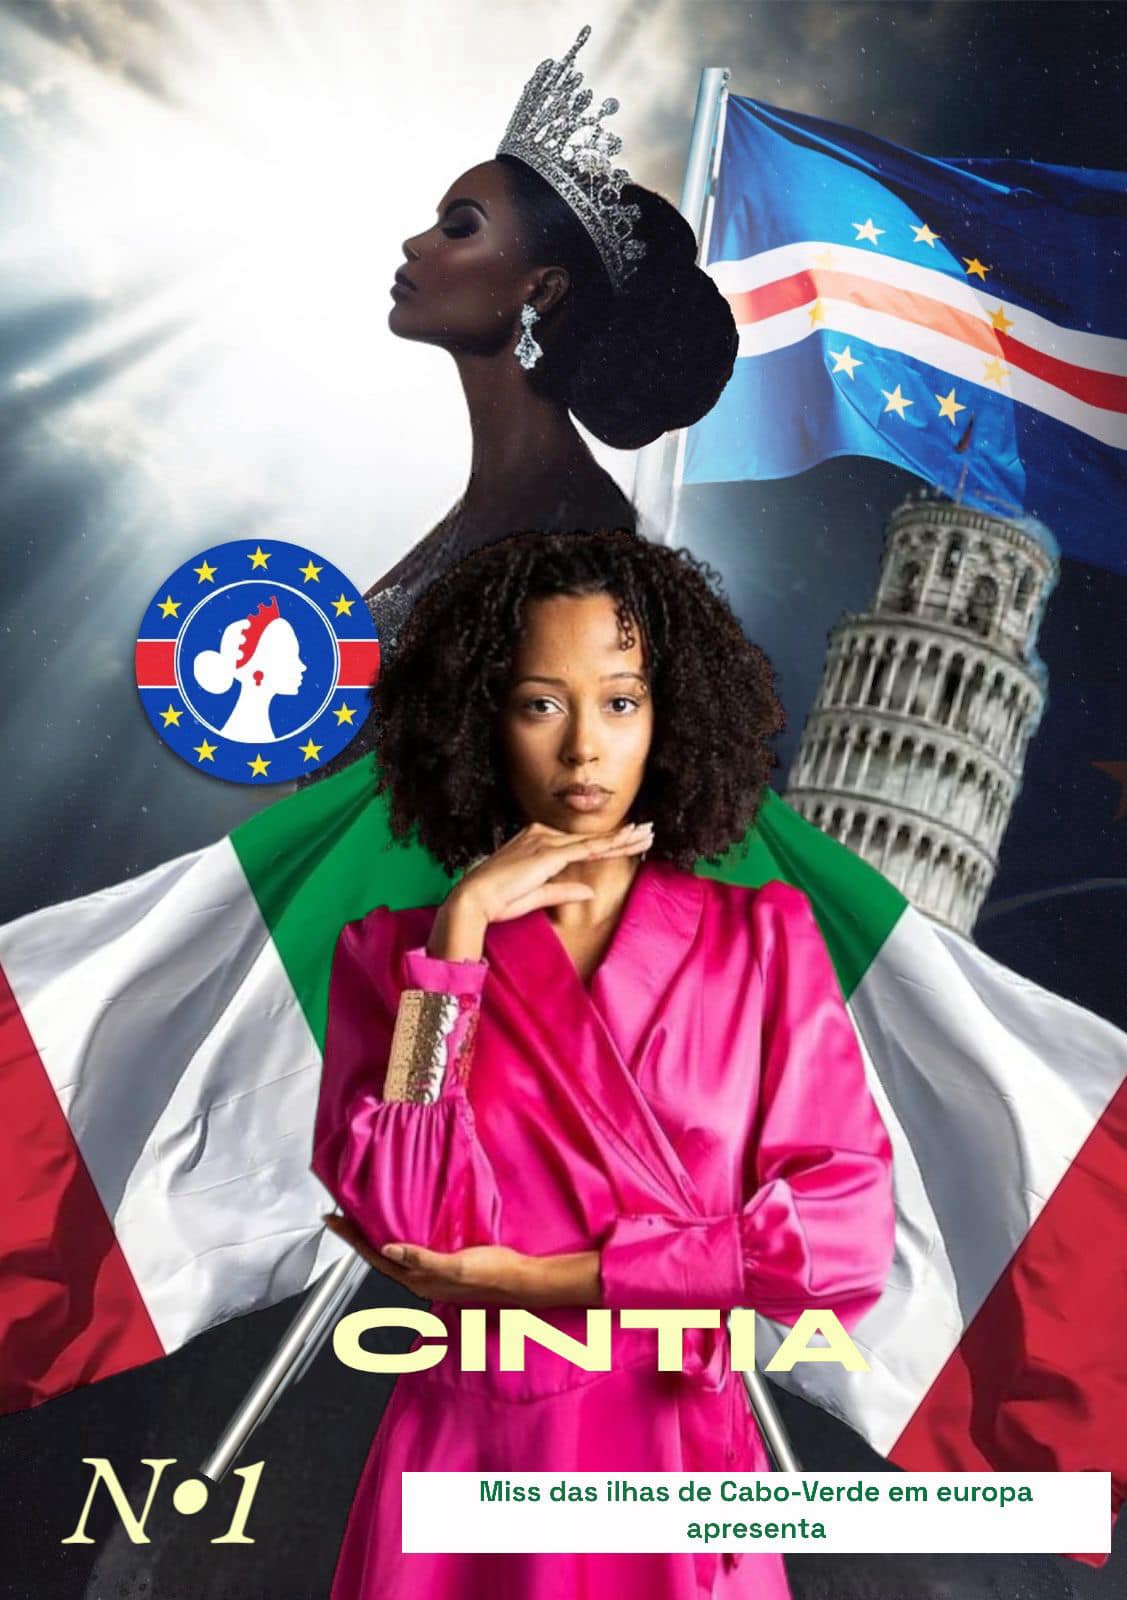 MISS CAPE VERDE ISLANDS IN EUROPE – MISS CAP -VERT DES ÎLES EUROPE – Contestant number 1 Miss CINTIA representing Miss Cape Verde Islands from Italy